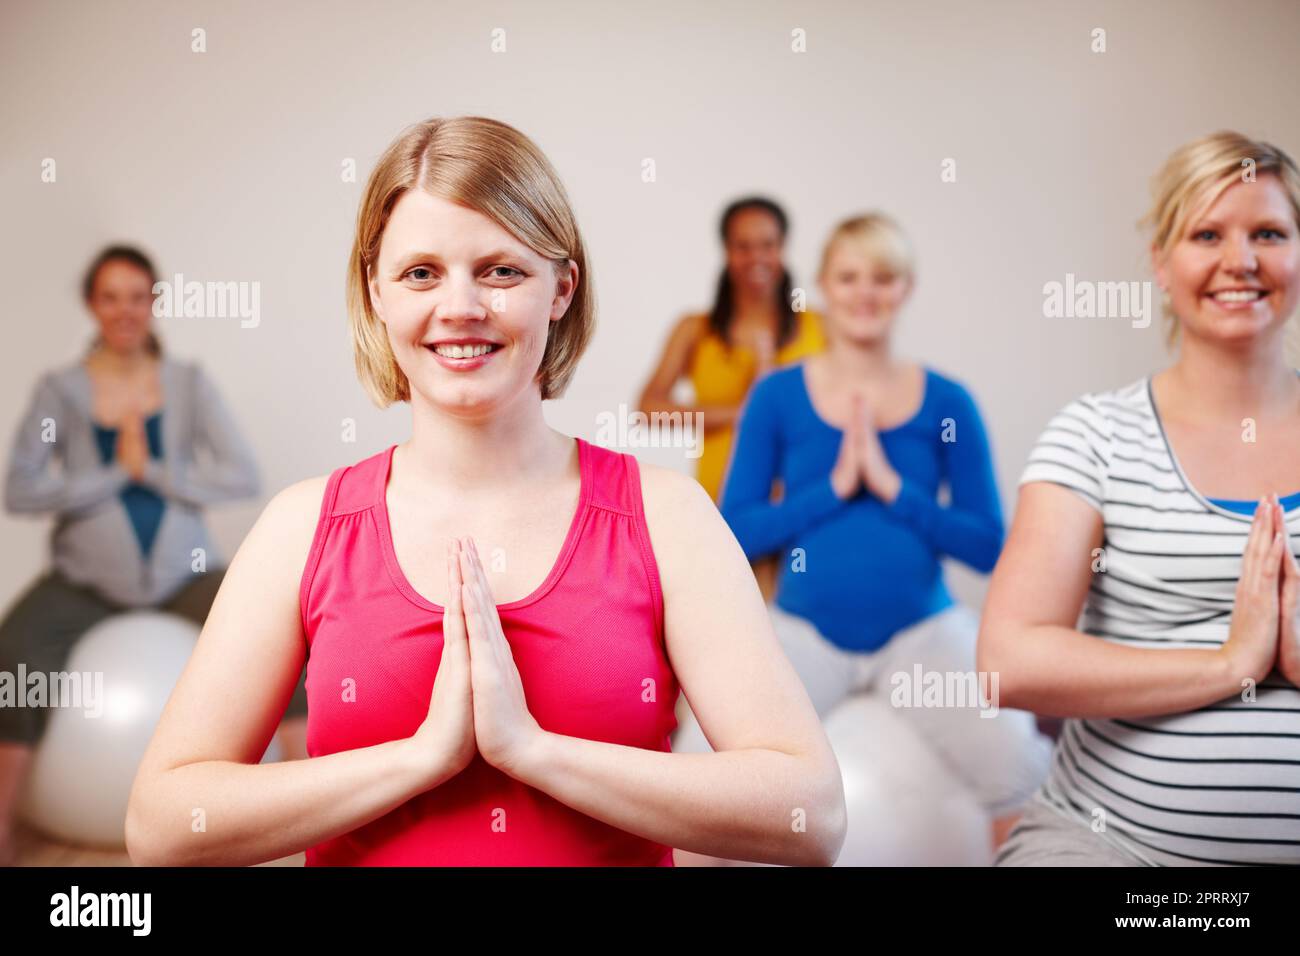 Meditating on our maternity. A multi-ethnic group of pregnant women meditating on exercise balls in a yoga class. Stock Photo